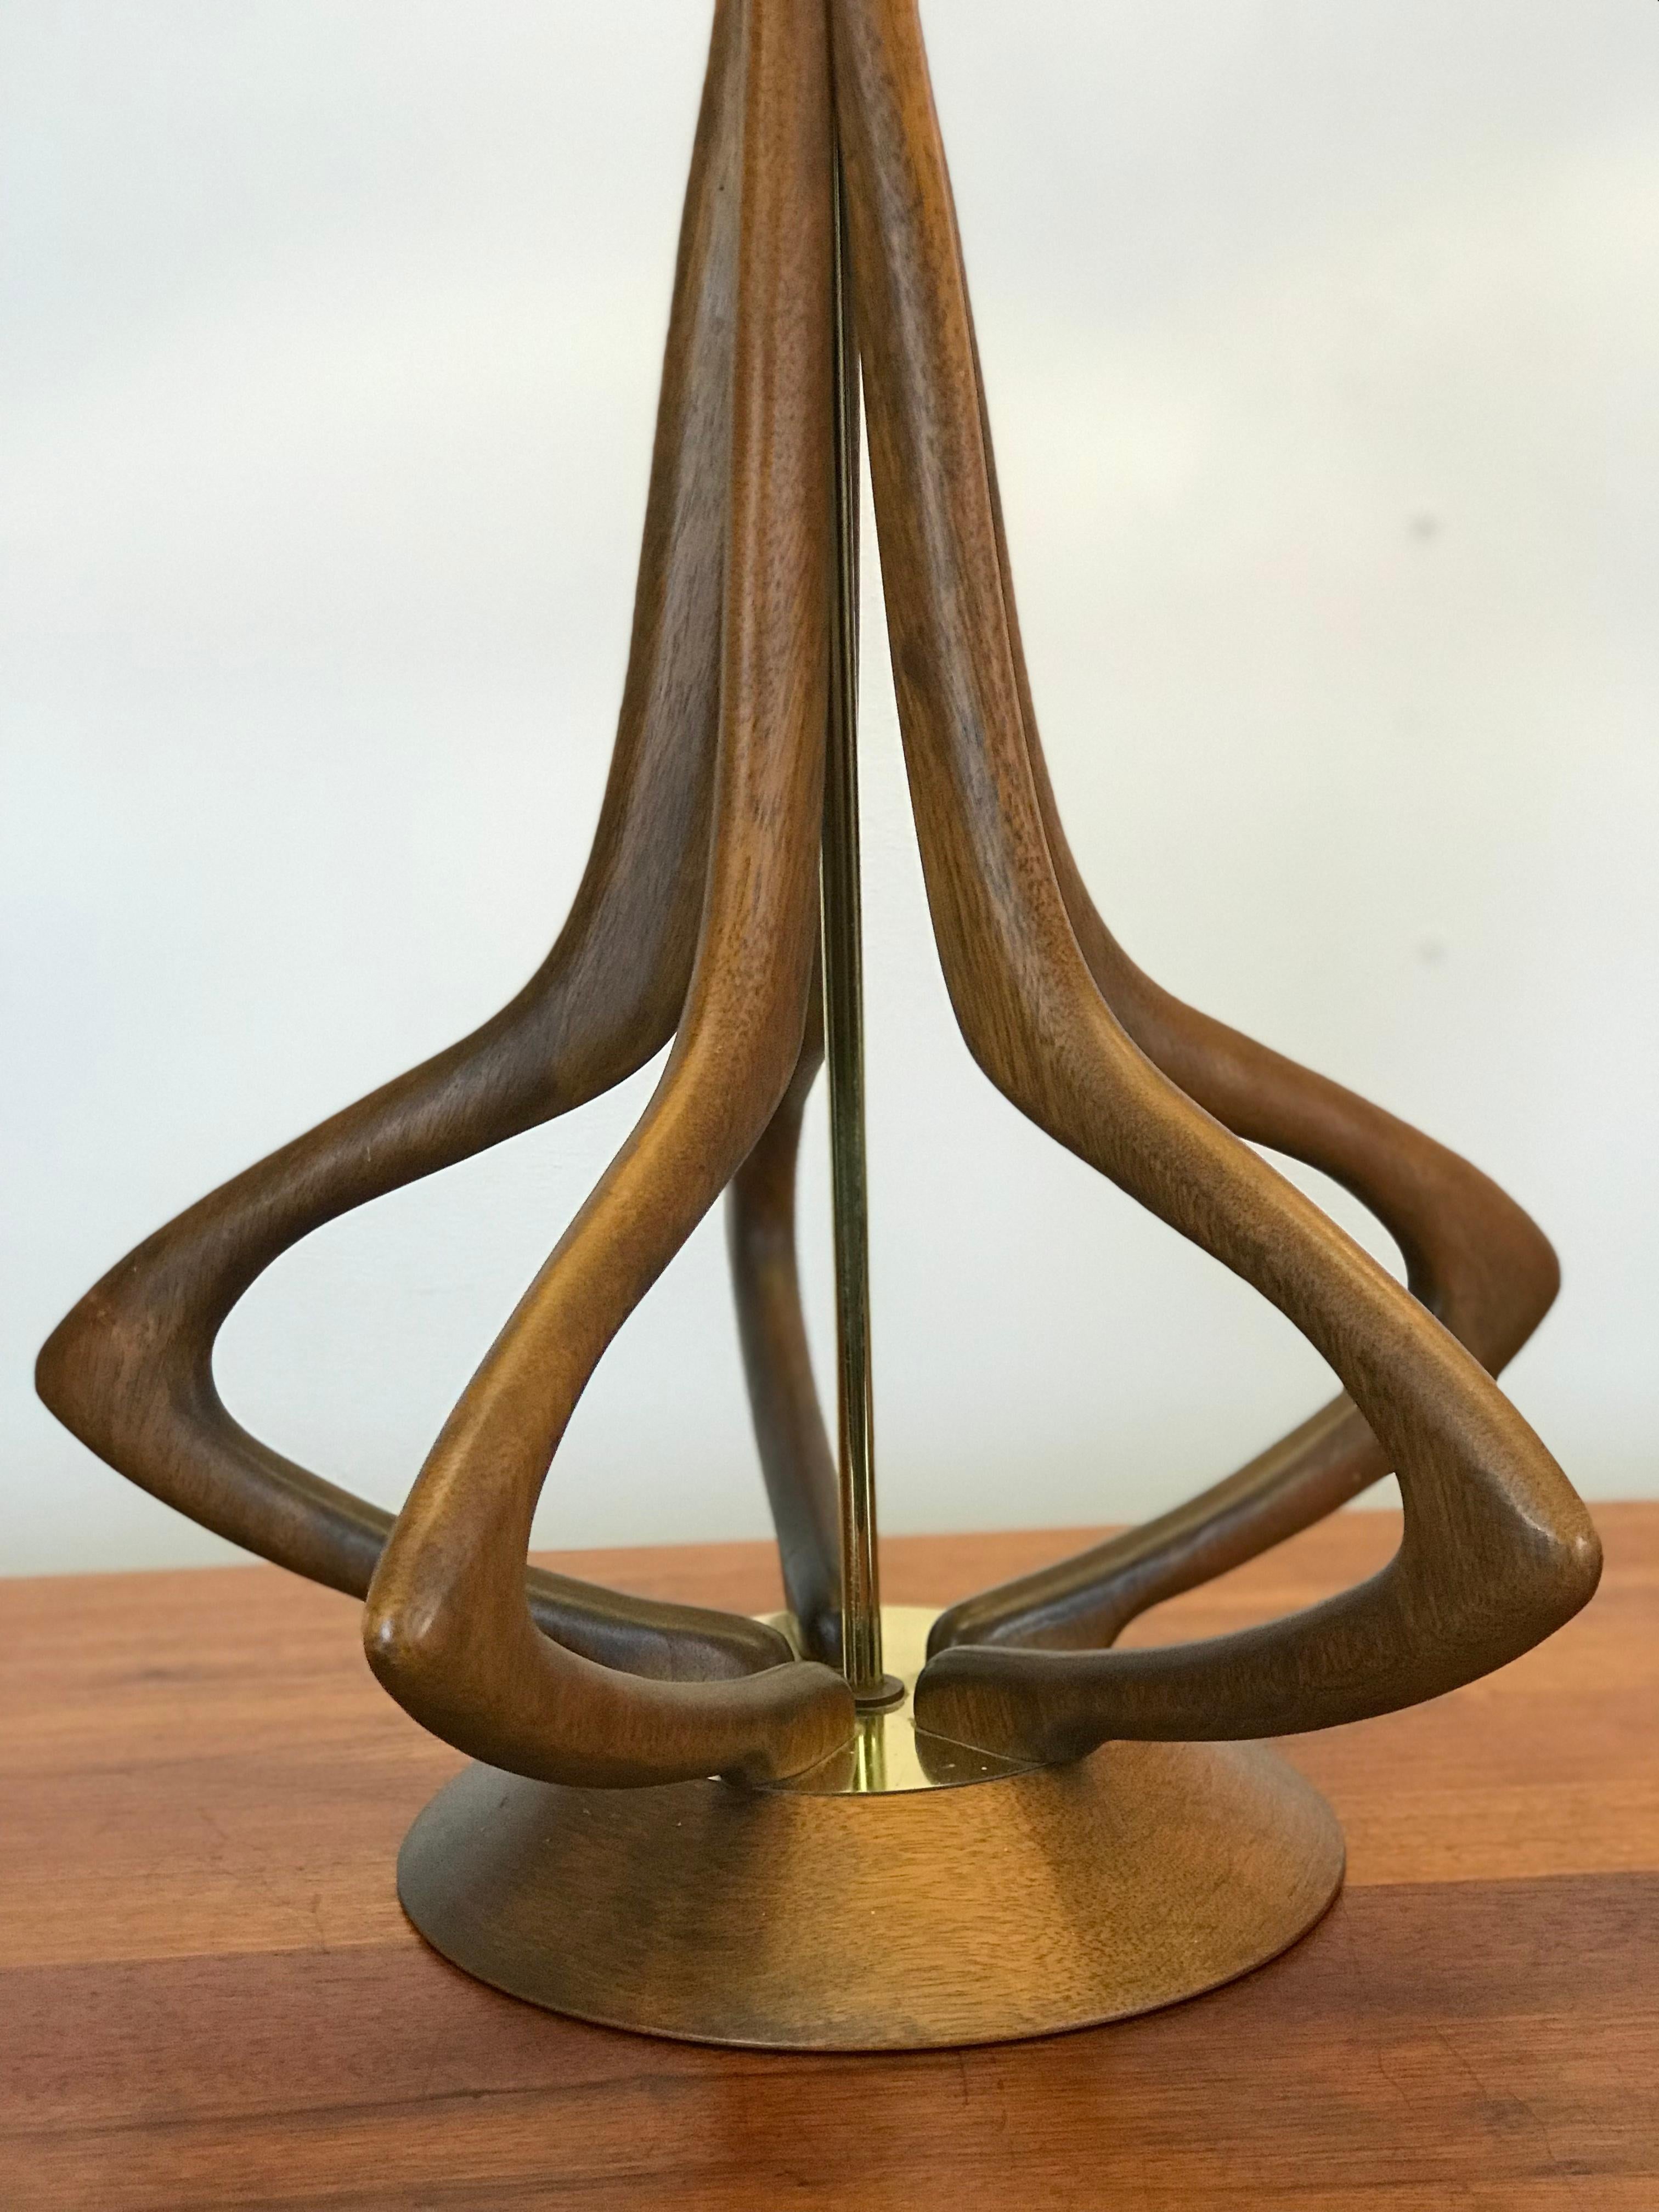 American Mid-Century Modern Lamps in Sculptural Walnut with Brass Accents by Modeline